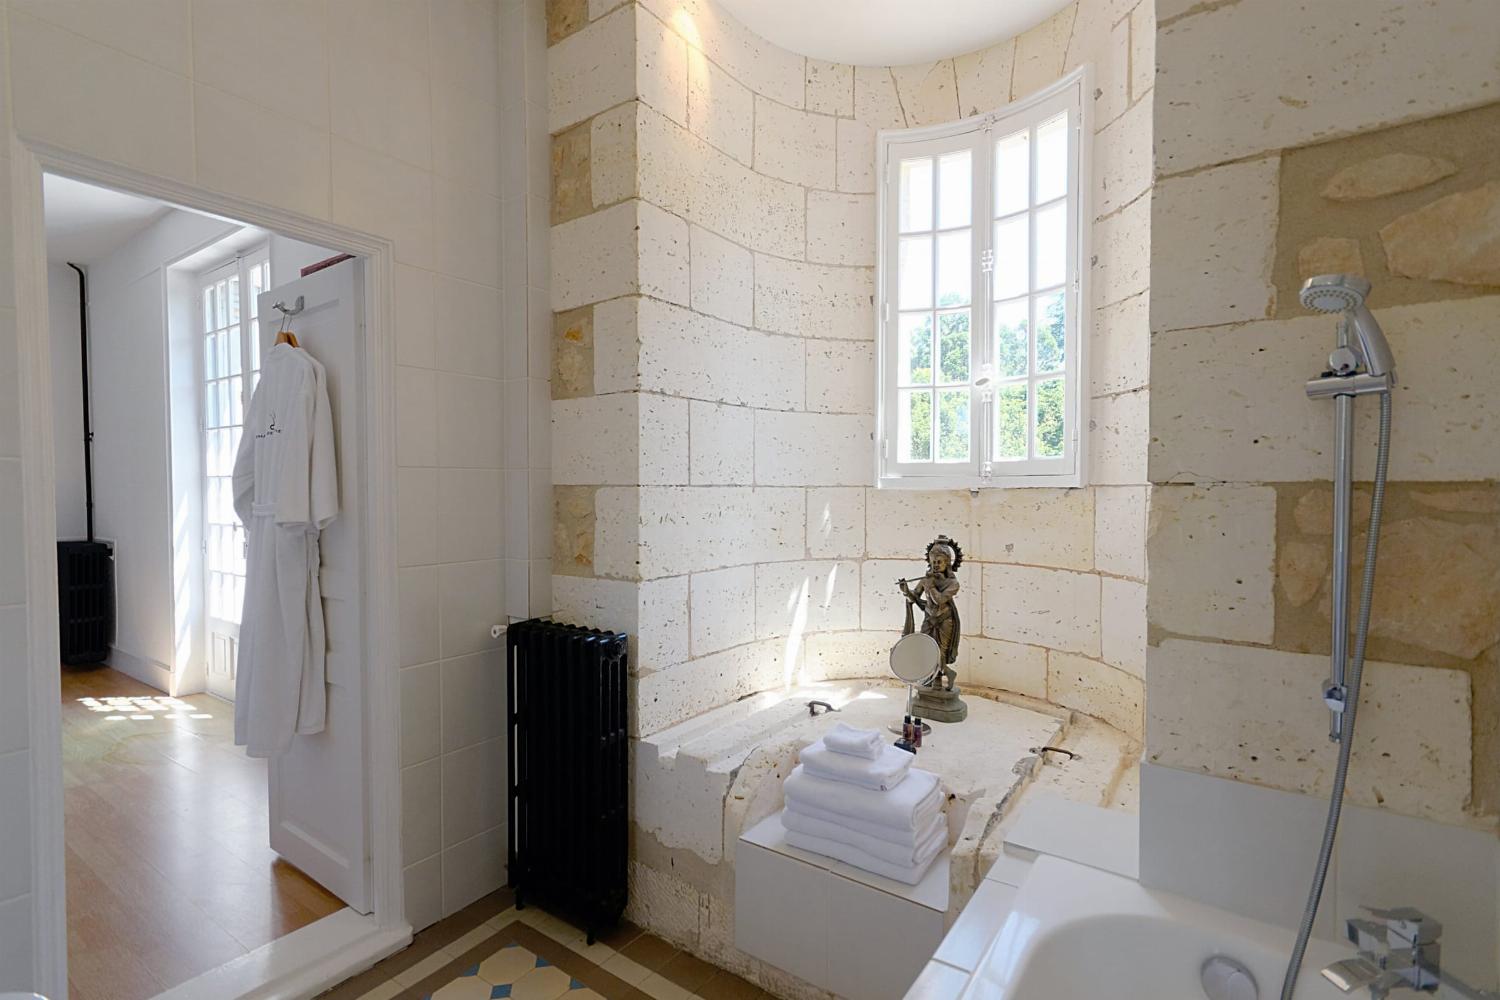 Bathroom | Vacation château in Charente